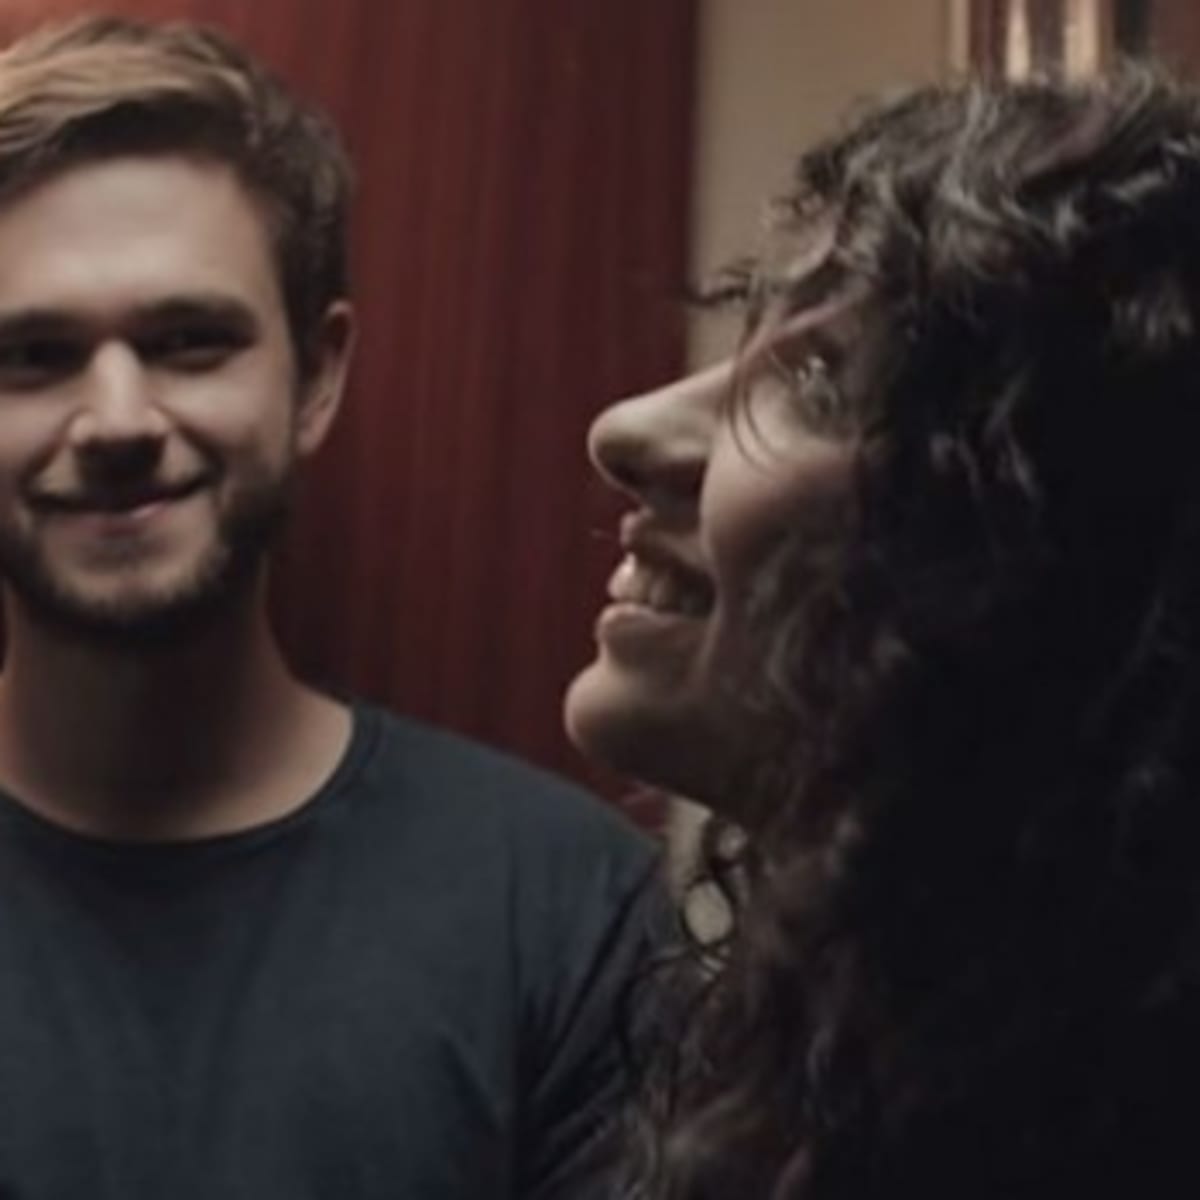 Zedd Alessia Cara Turn Back Time With Their New Music Video Stay Edm Com The Latest Electronic Dance Music News Reviews Artists